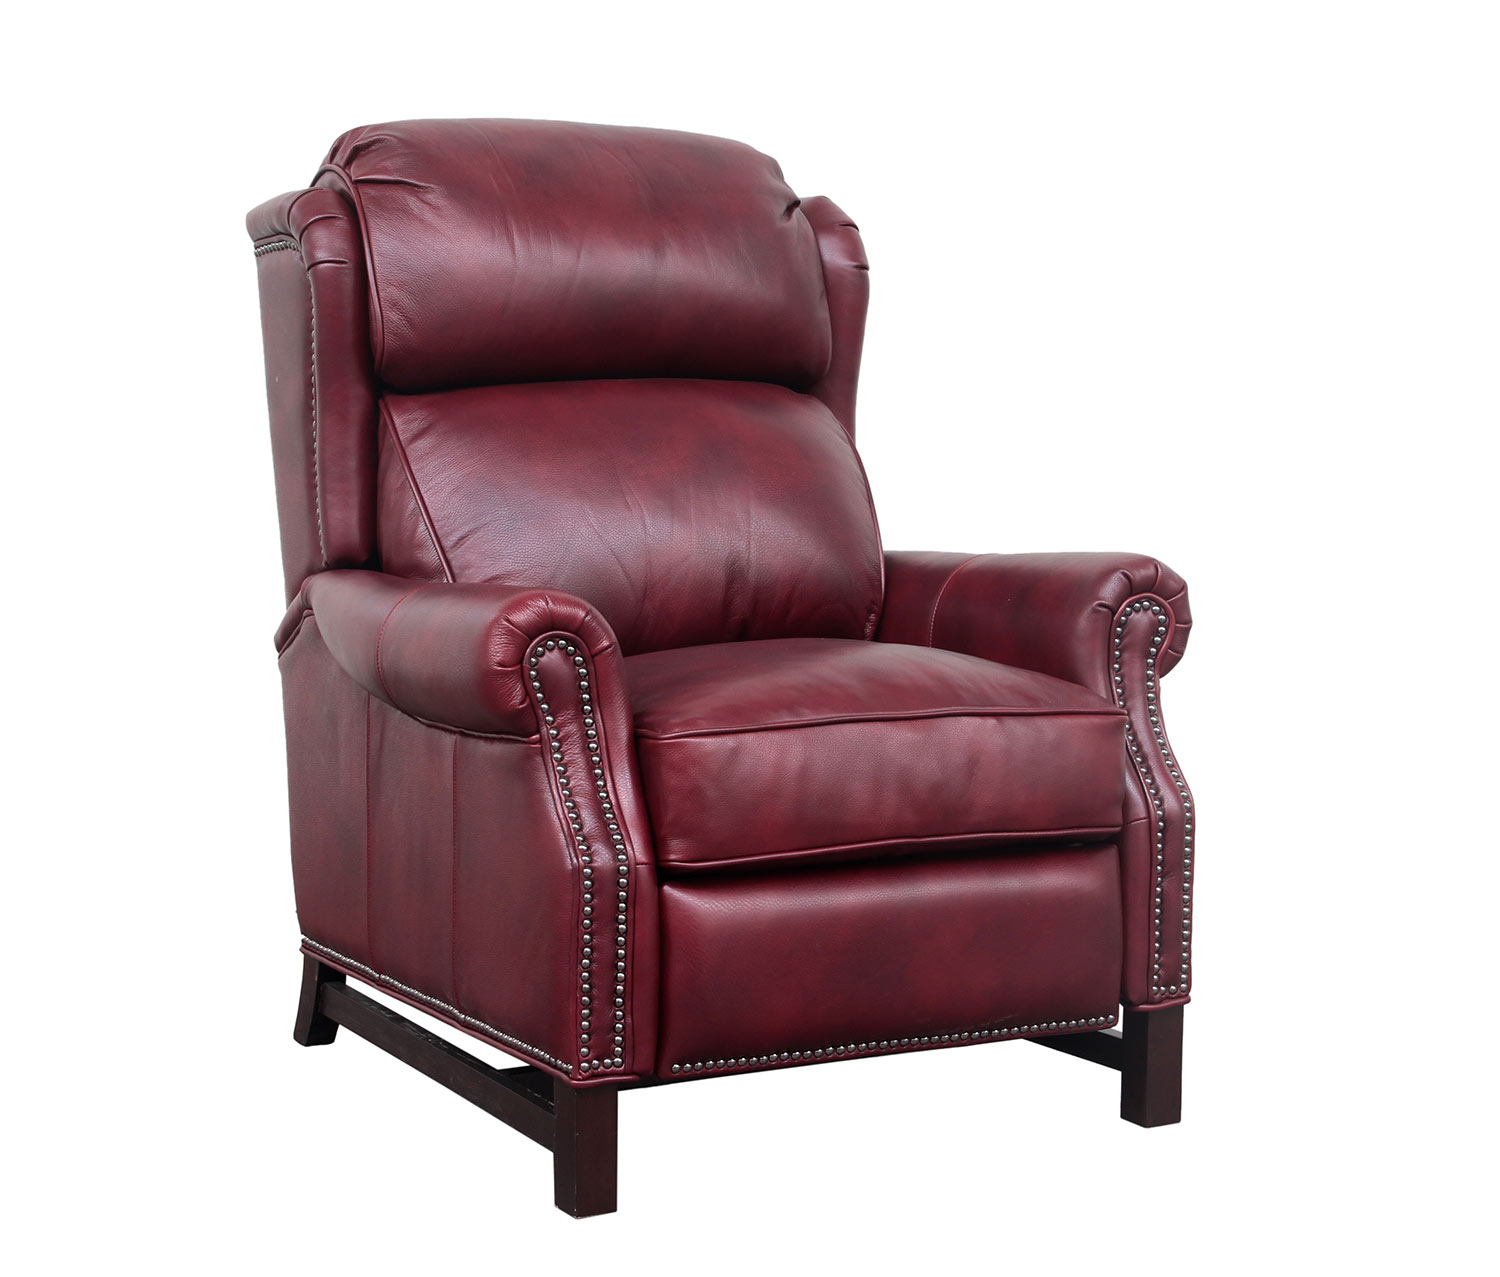 Barcalounger Thornfield Recliner Chair - Wenlock Carmine/All Leather